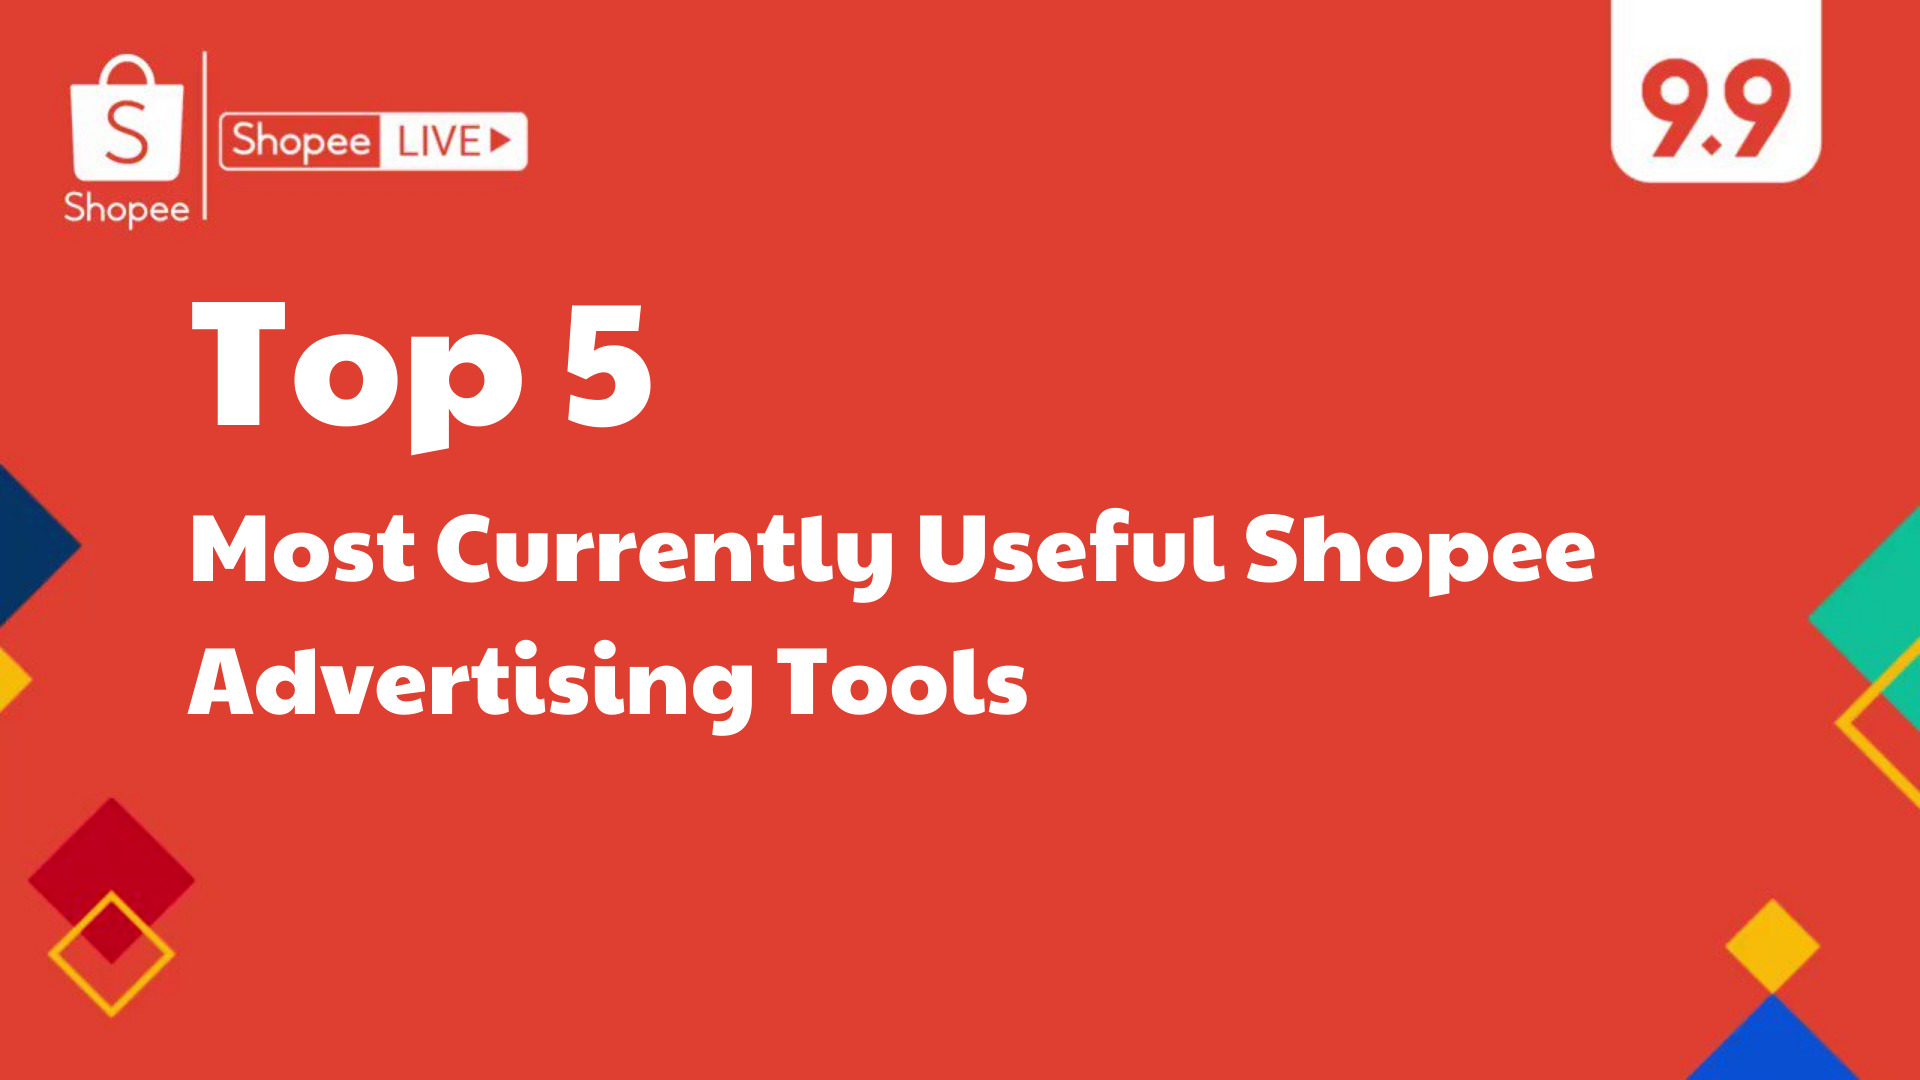 Top 5 Most Useful Shopee Advertising Tools Today